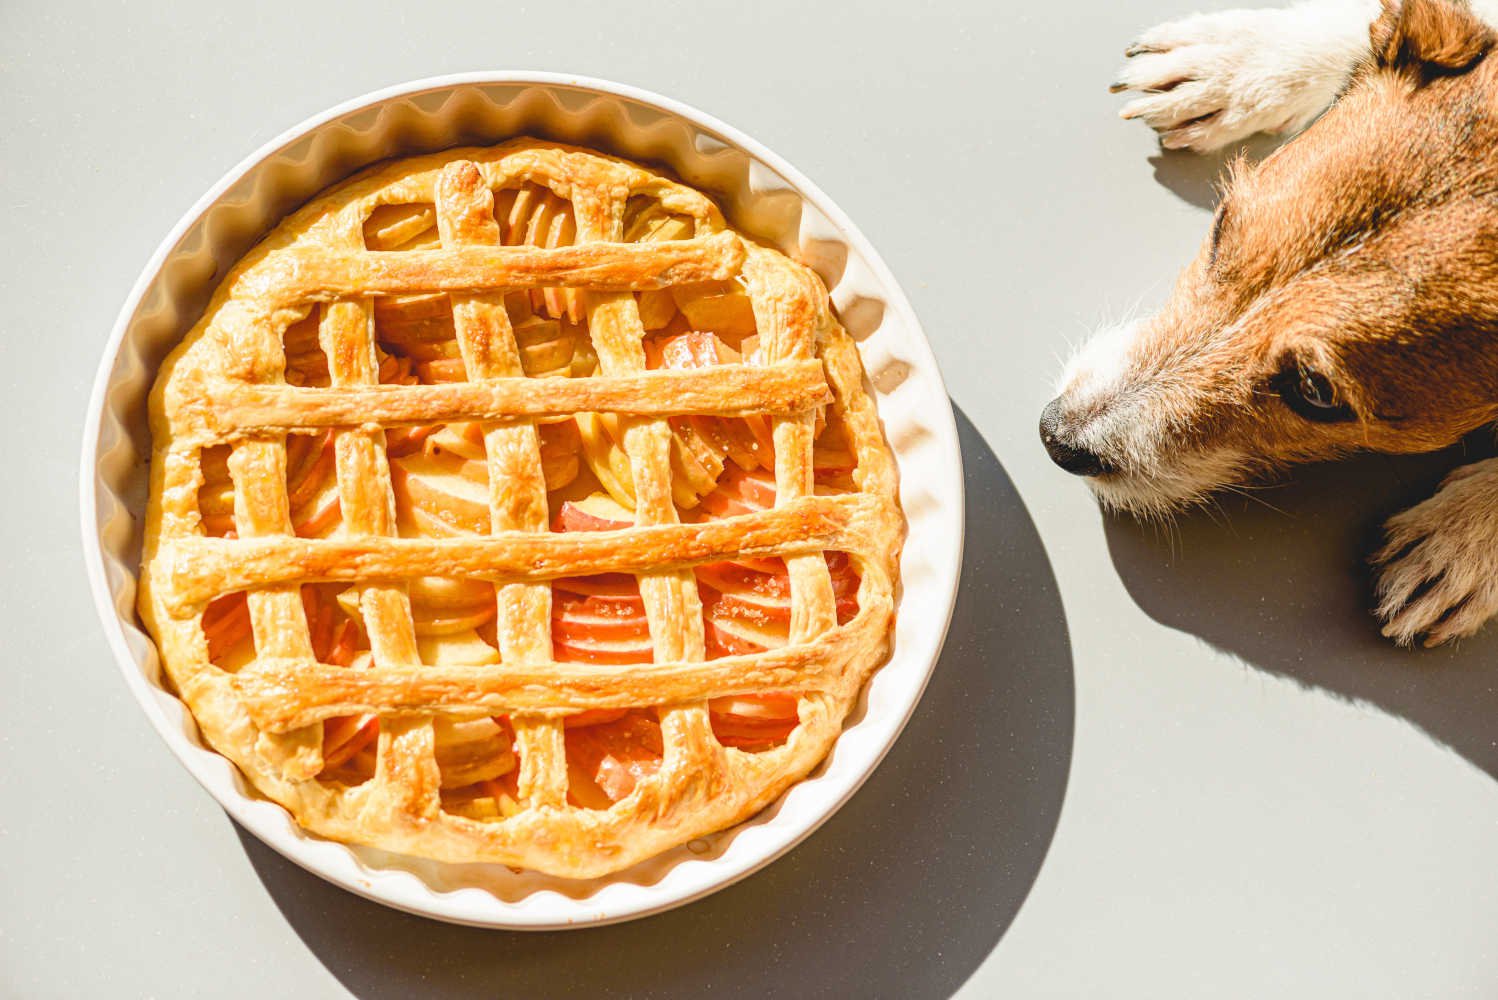 A bird's eye view of a brown and white dog staring at an apple pie.